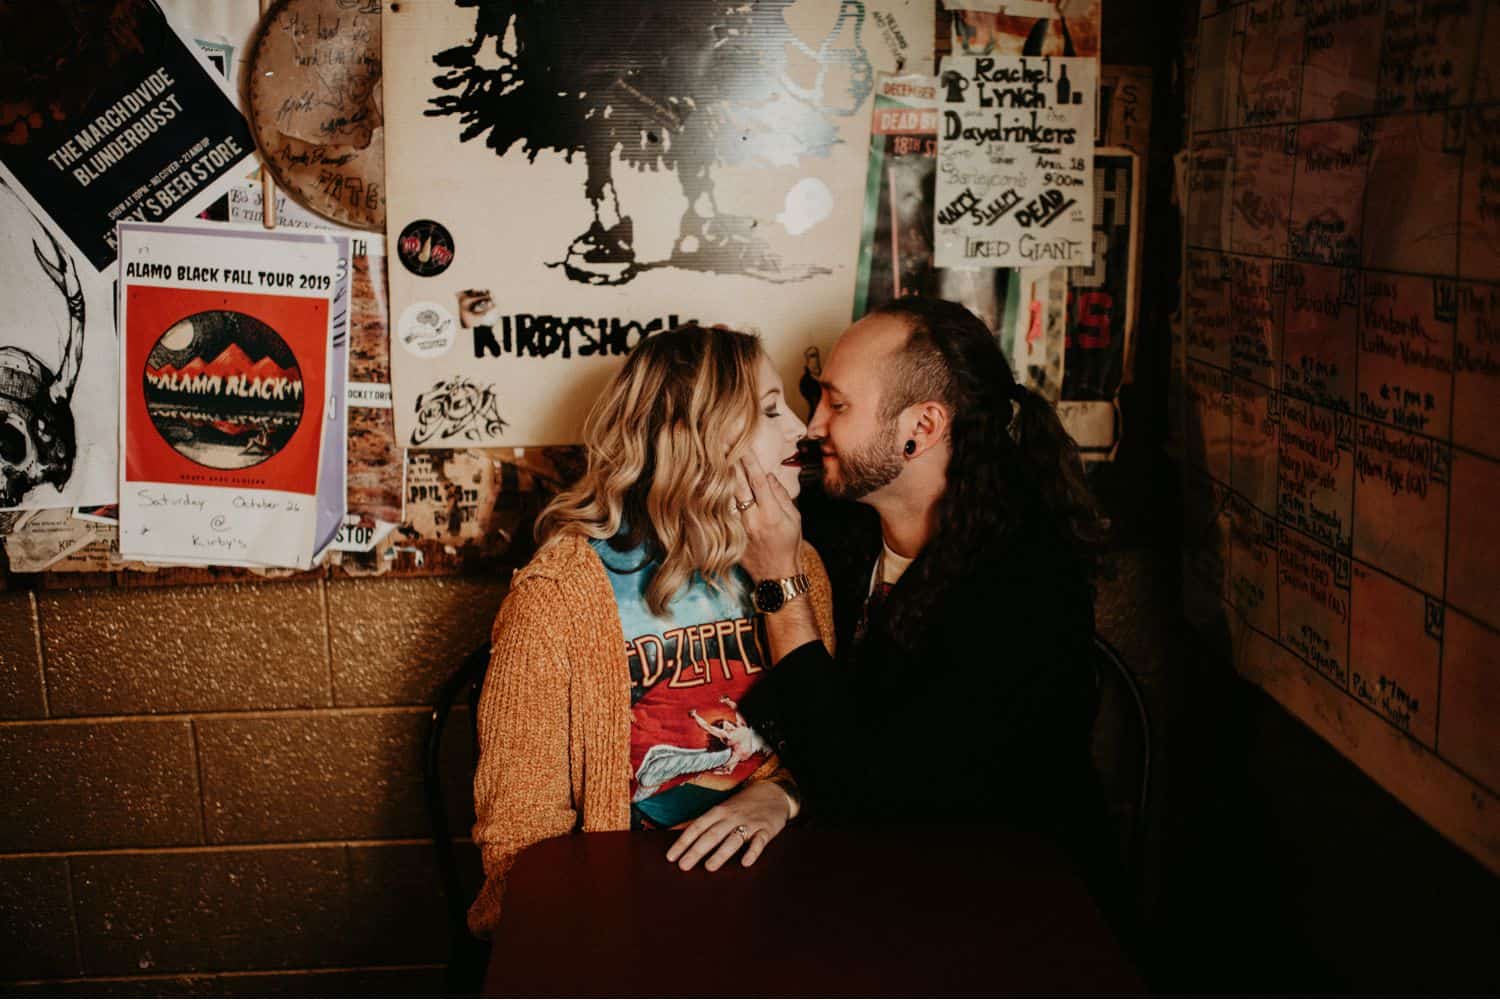 Bounce a flash off the wall or ceiling if you aren't sure how to take photos in low lights. In this image, a hipster couple sits in a bar booth kissing. Image by Shelby Laine Photography